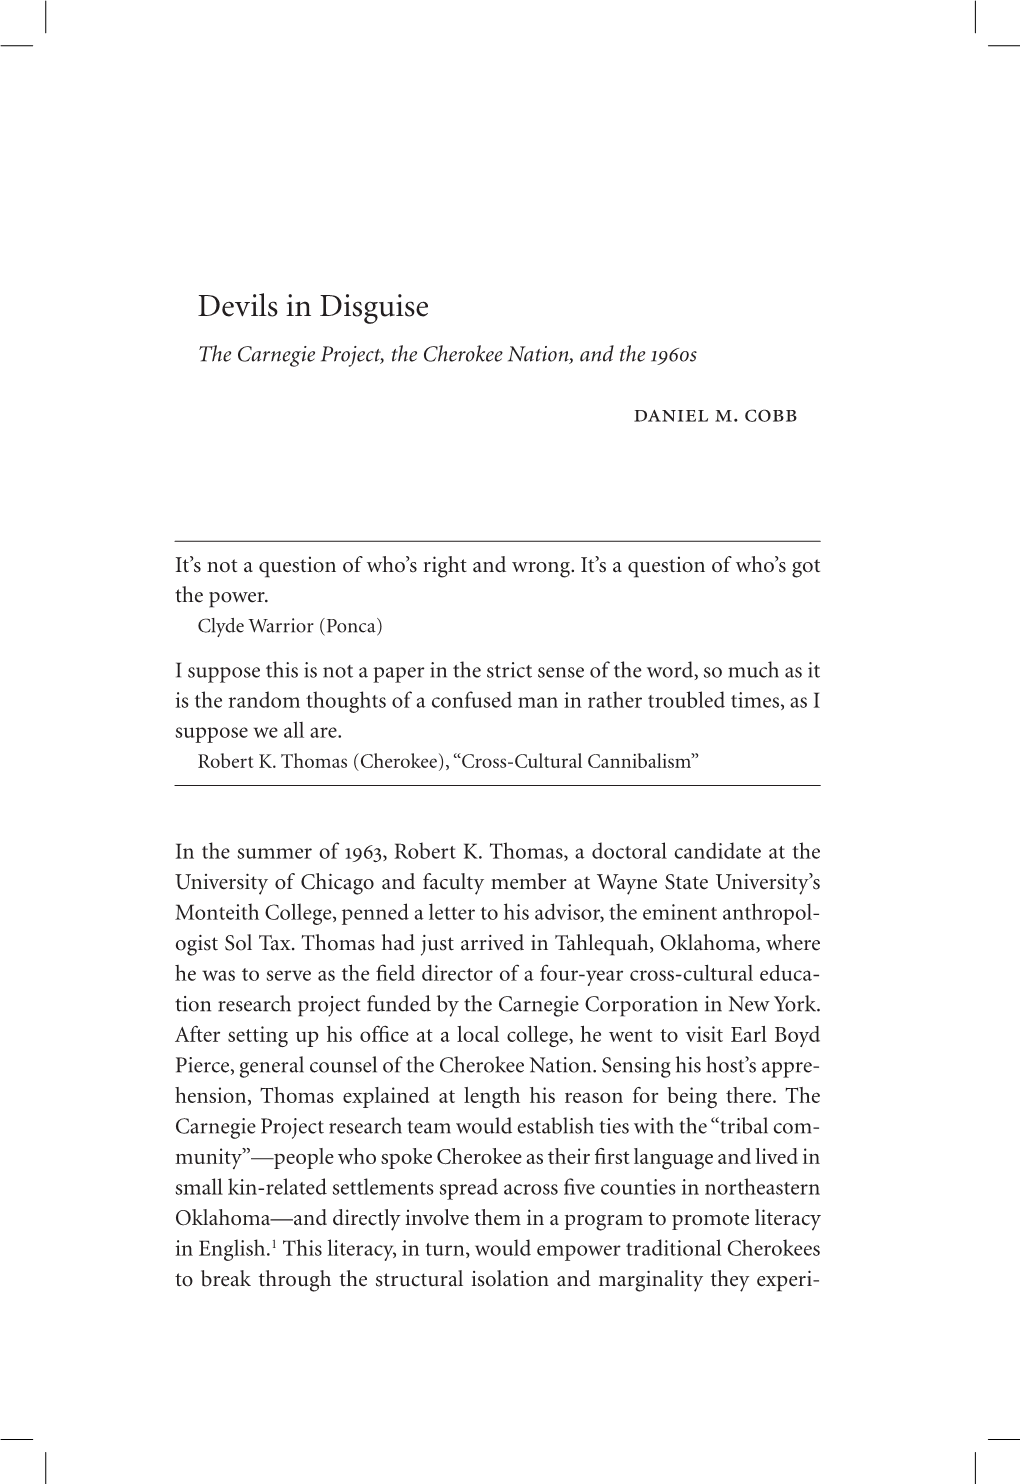 Devils in Disguise the Carnegie Project, the Cherokee Nation, and the 1960S